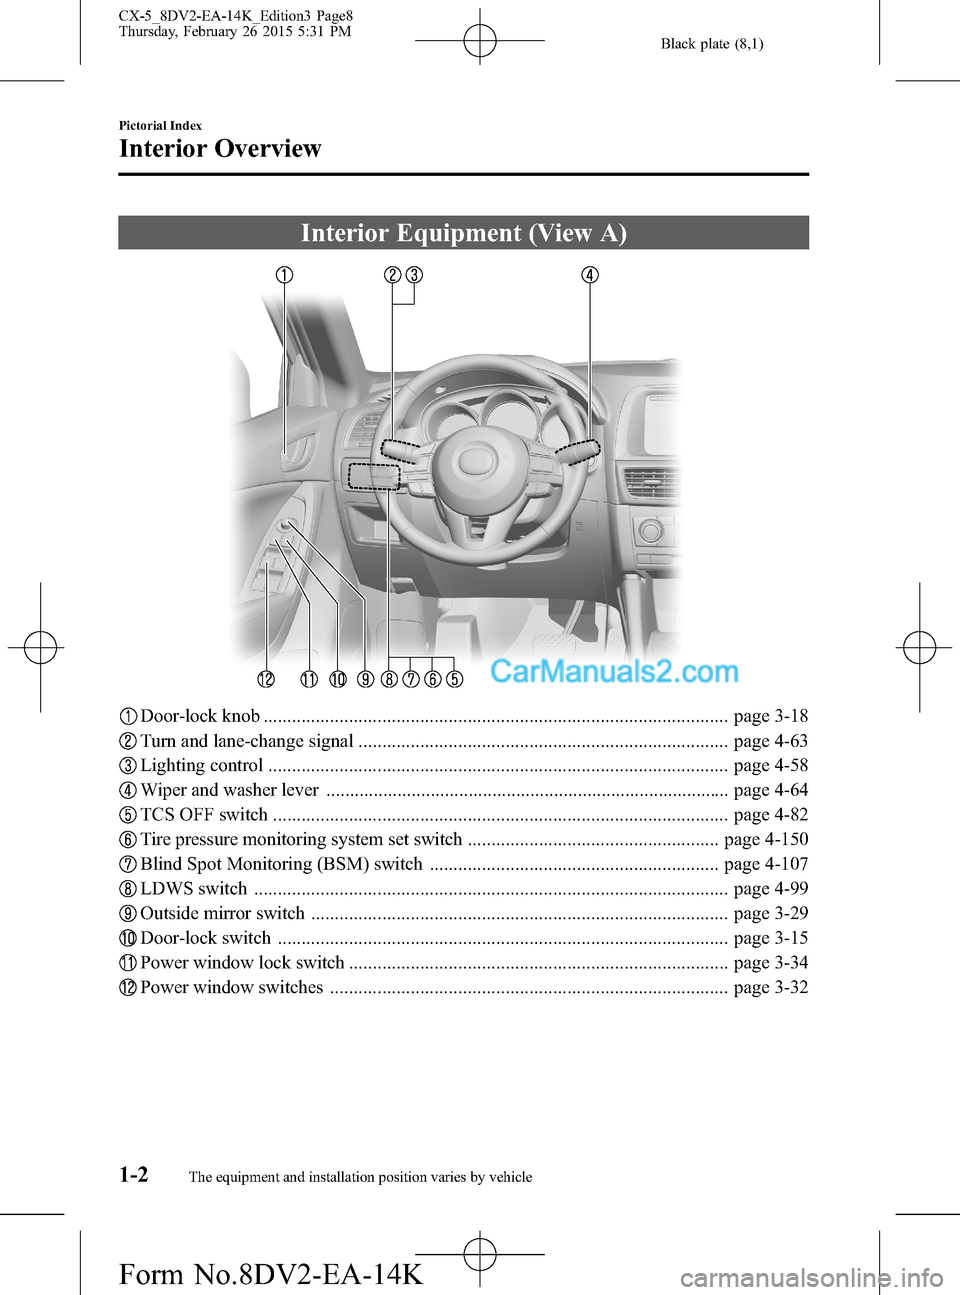 MAZDA MODEL CX-5 2016  Owners Manual (in English) Black plate (8,1)
Interior Equipment (View A)
Door-lock knob .................................................................................................. page 3-18
Turn and lane-change signal ..